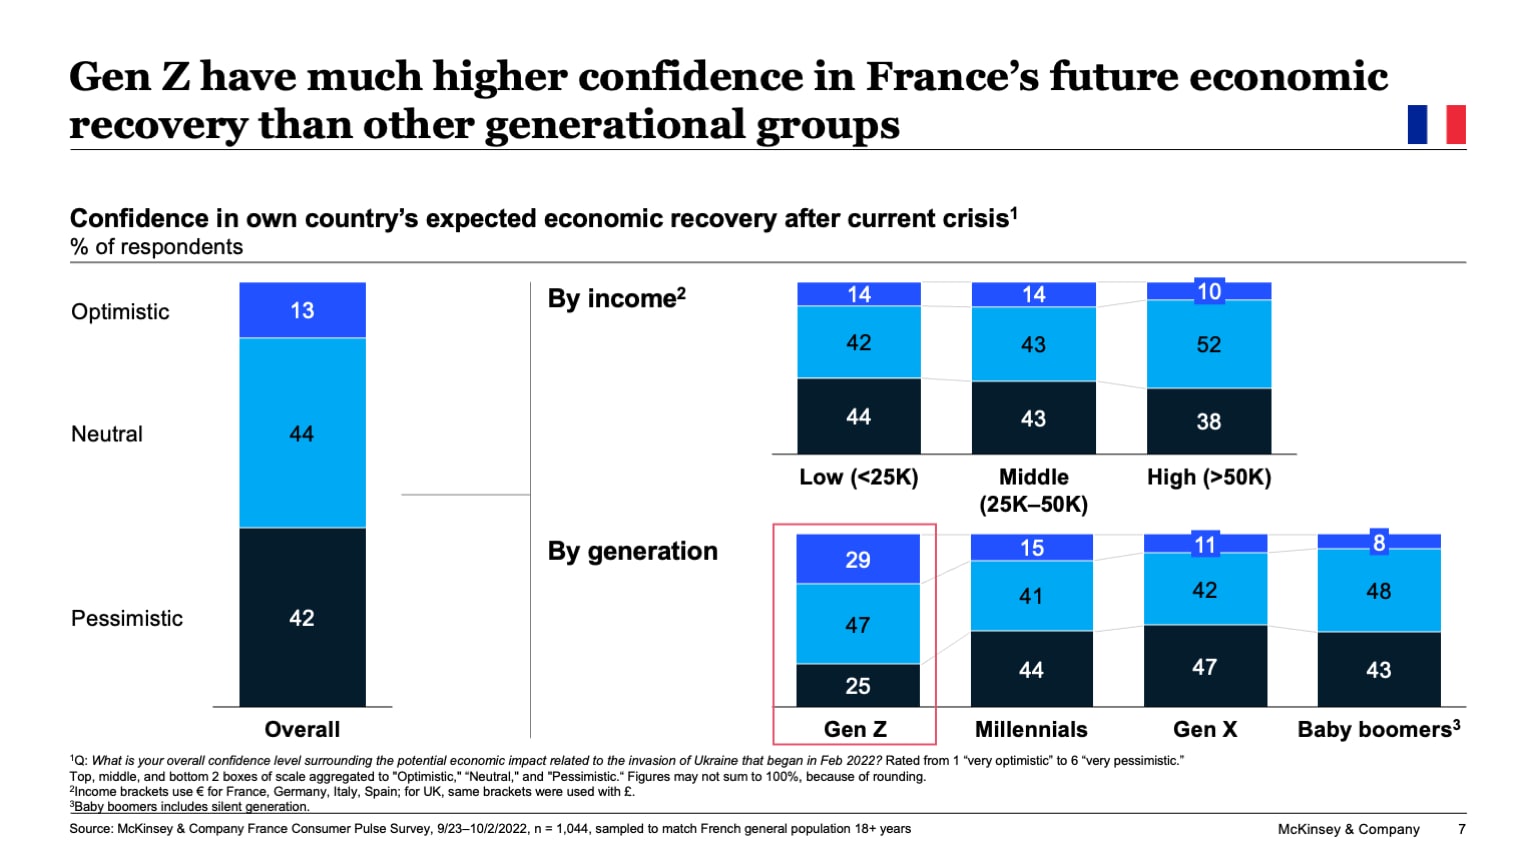 Gen Z have much higher confidence in France’s future economic recovery than other generational groups